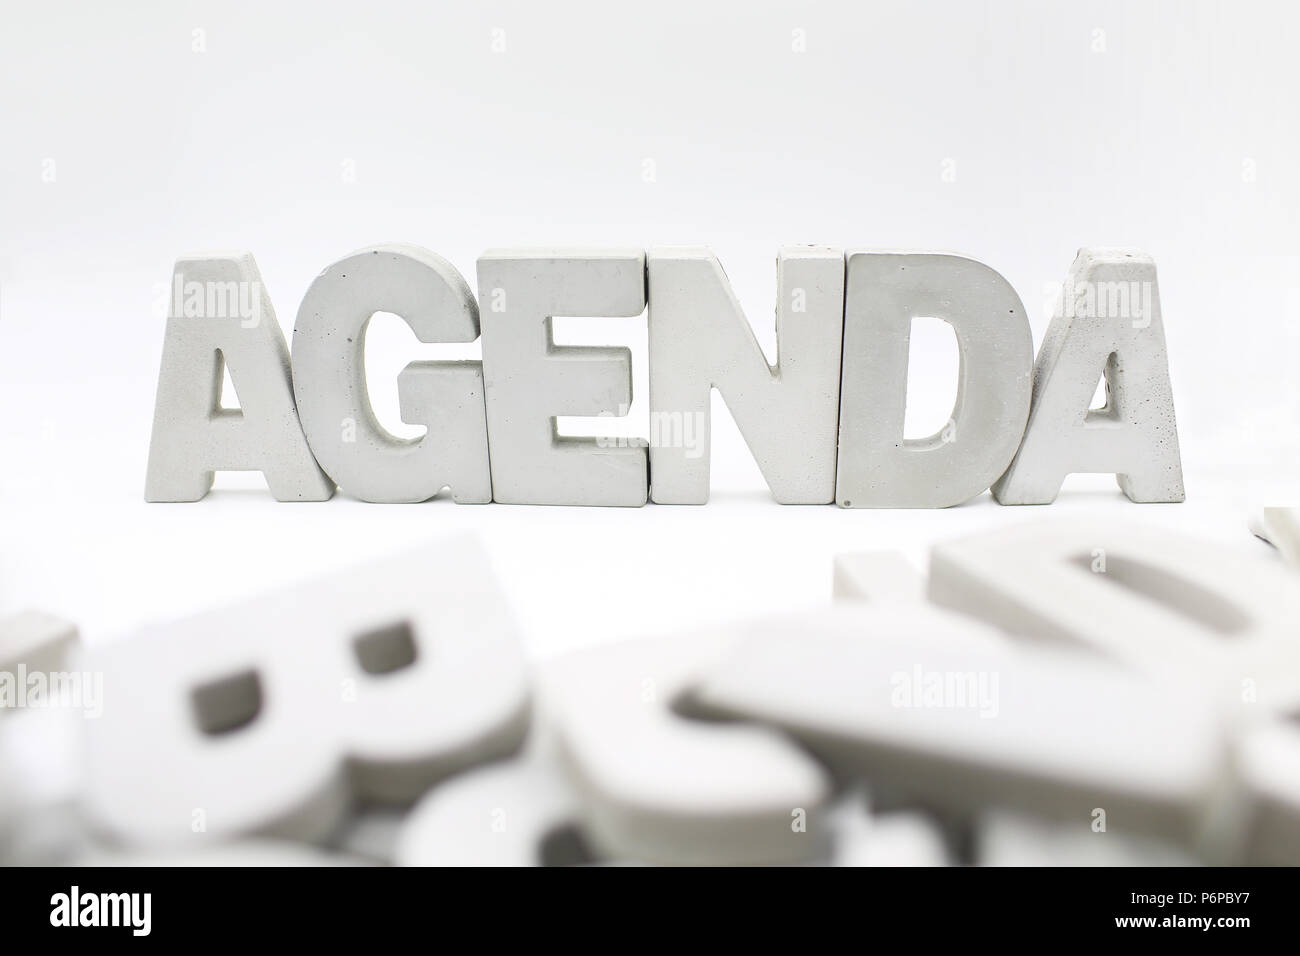 Agenda - letters written in beautiful boxes on white background